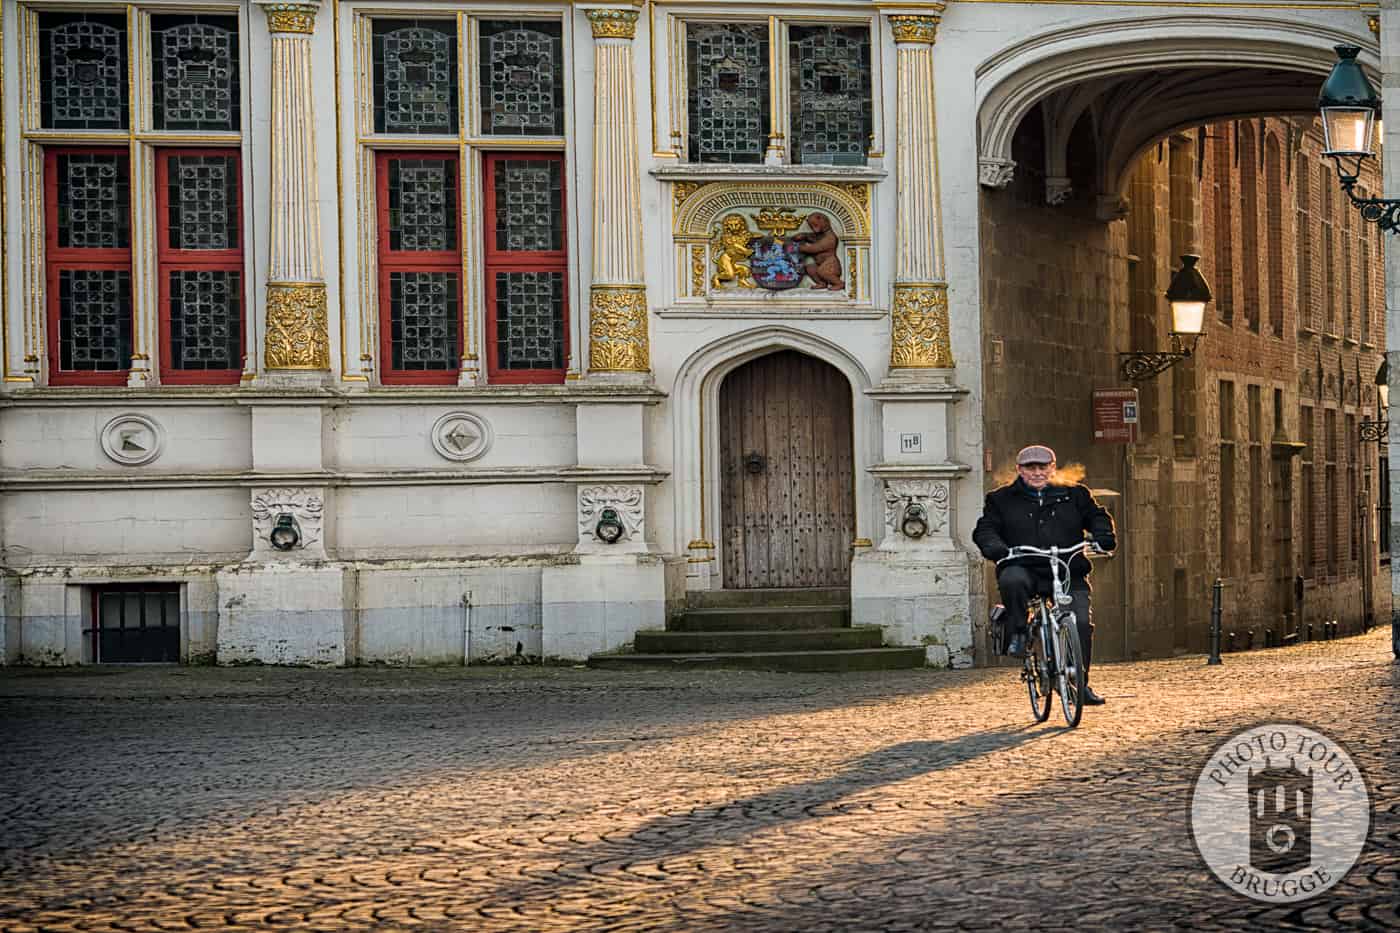 A lone biccle rider passes the city archive on the Burg square in Bruges Belgium. Photo by Photo Tour Brugge.